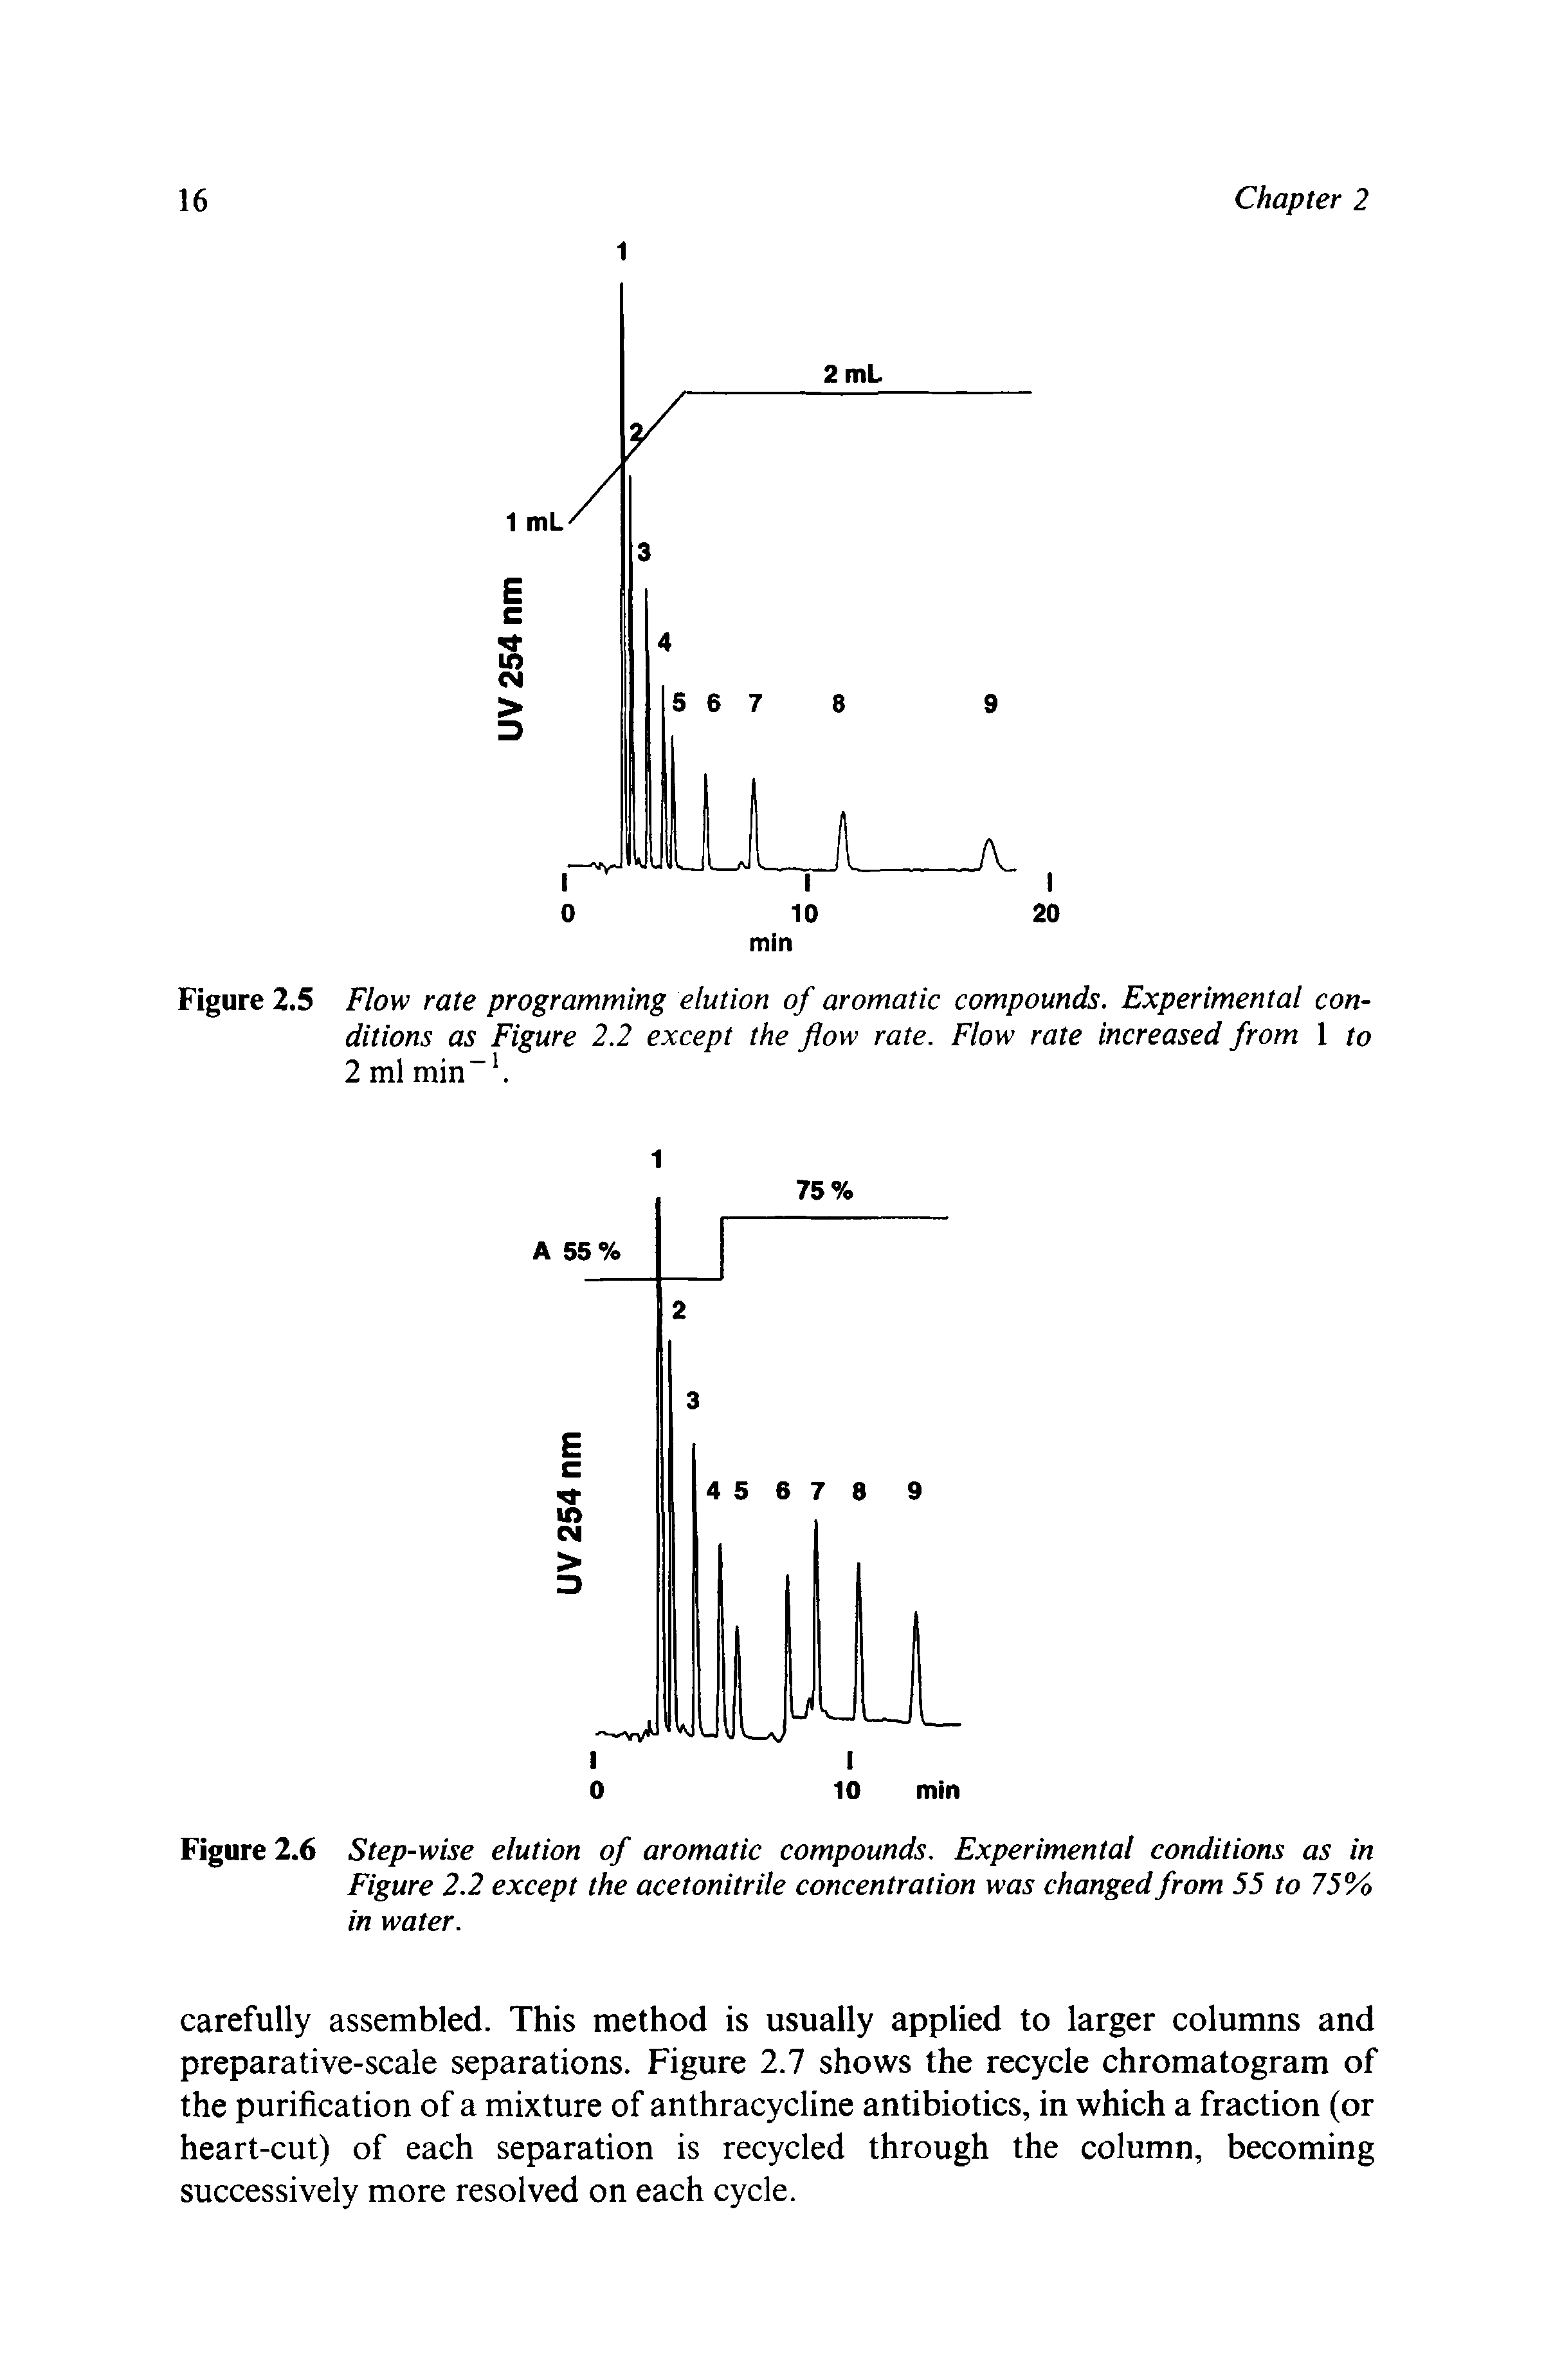 Figure 2.5 Flow rate programming elution of aromatic compounds. Experimental conditions as Figure 2.2 except the flow rate. Flow rate increased from 1 to 2 ml min-1.